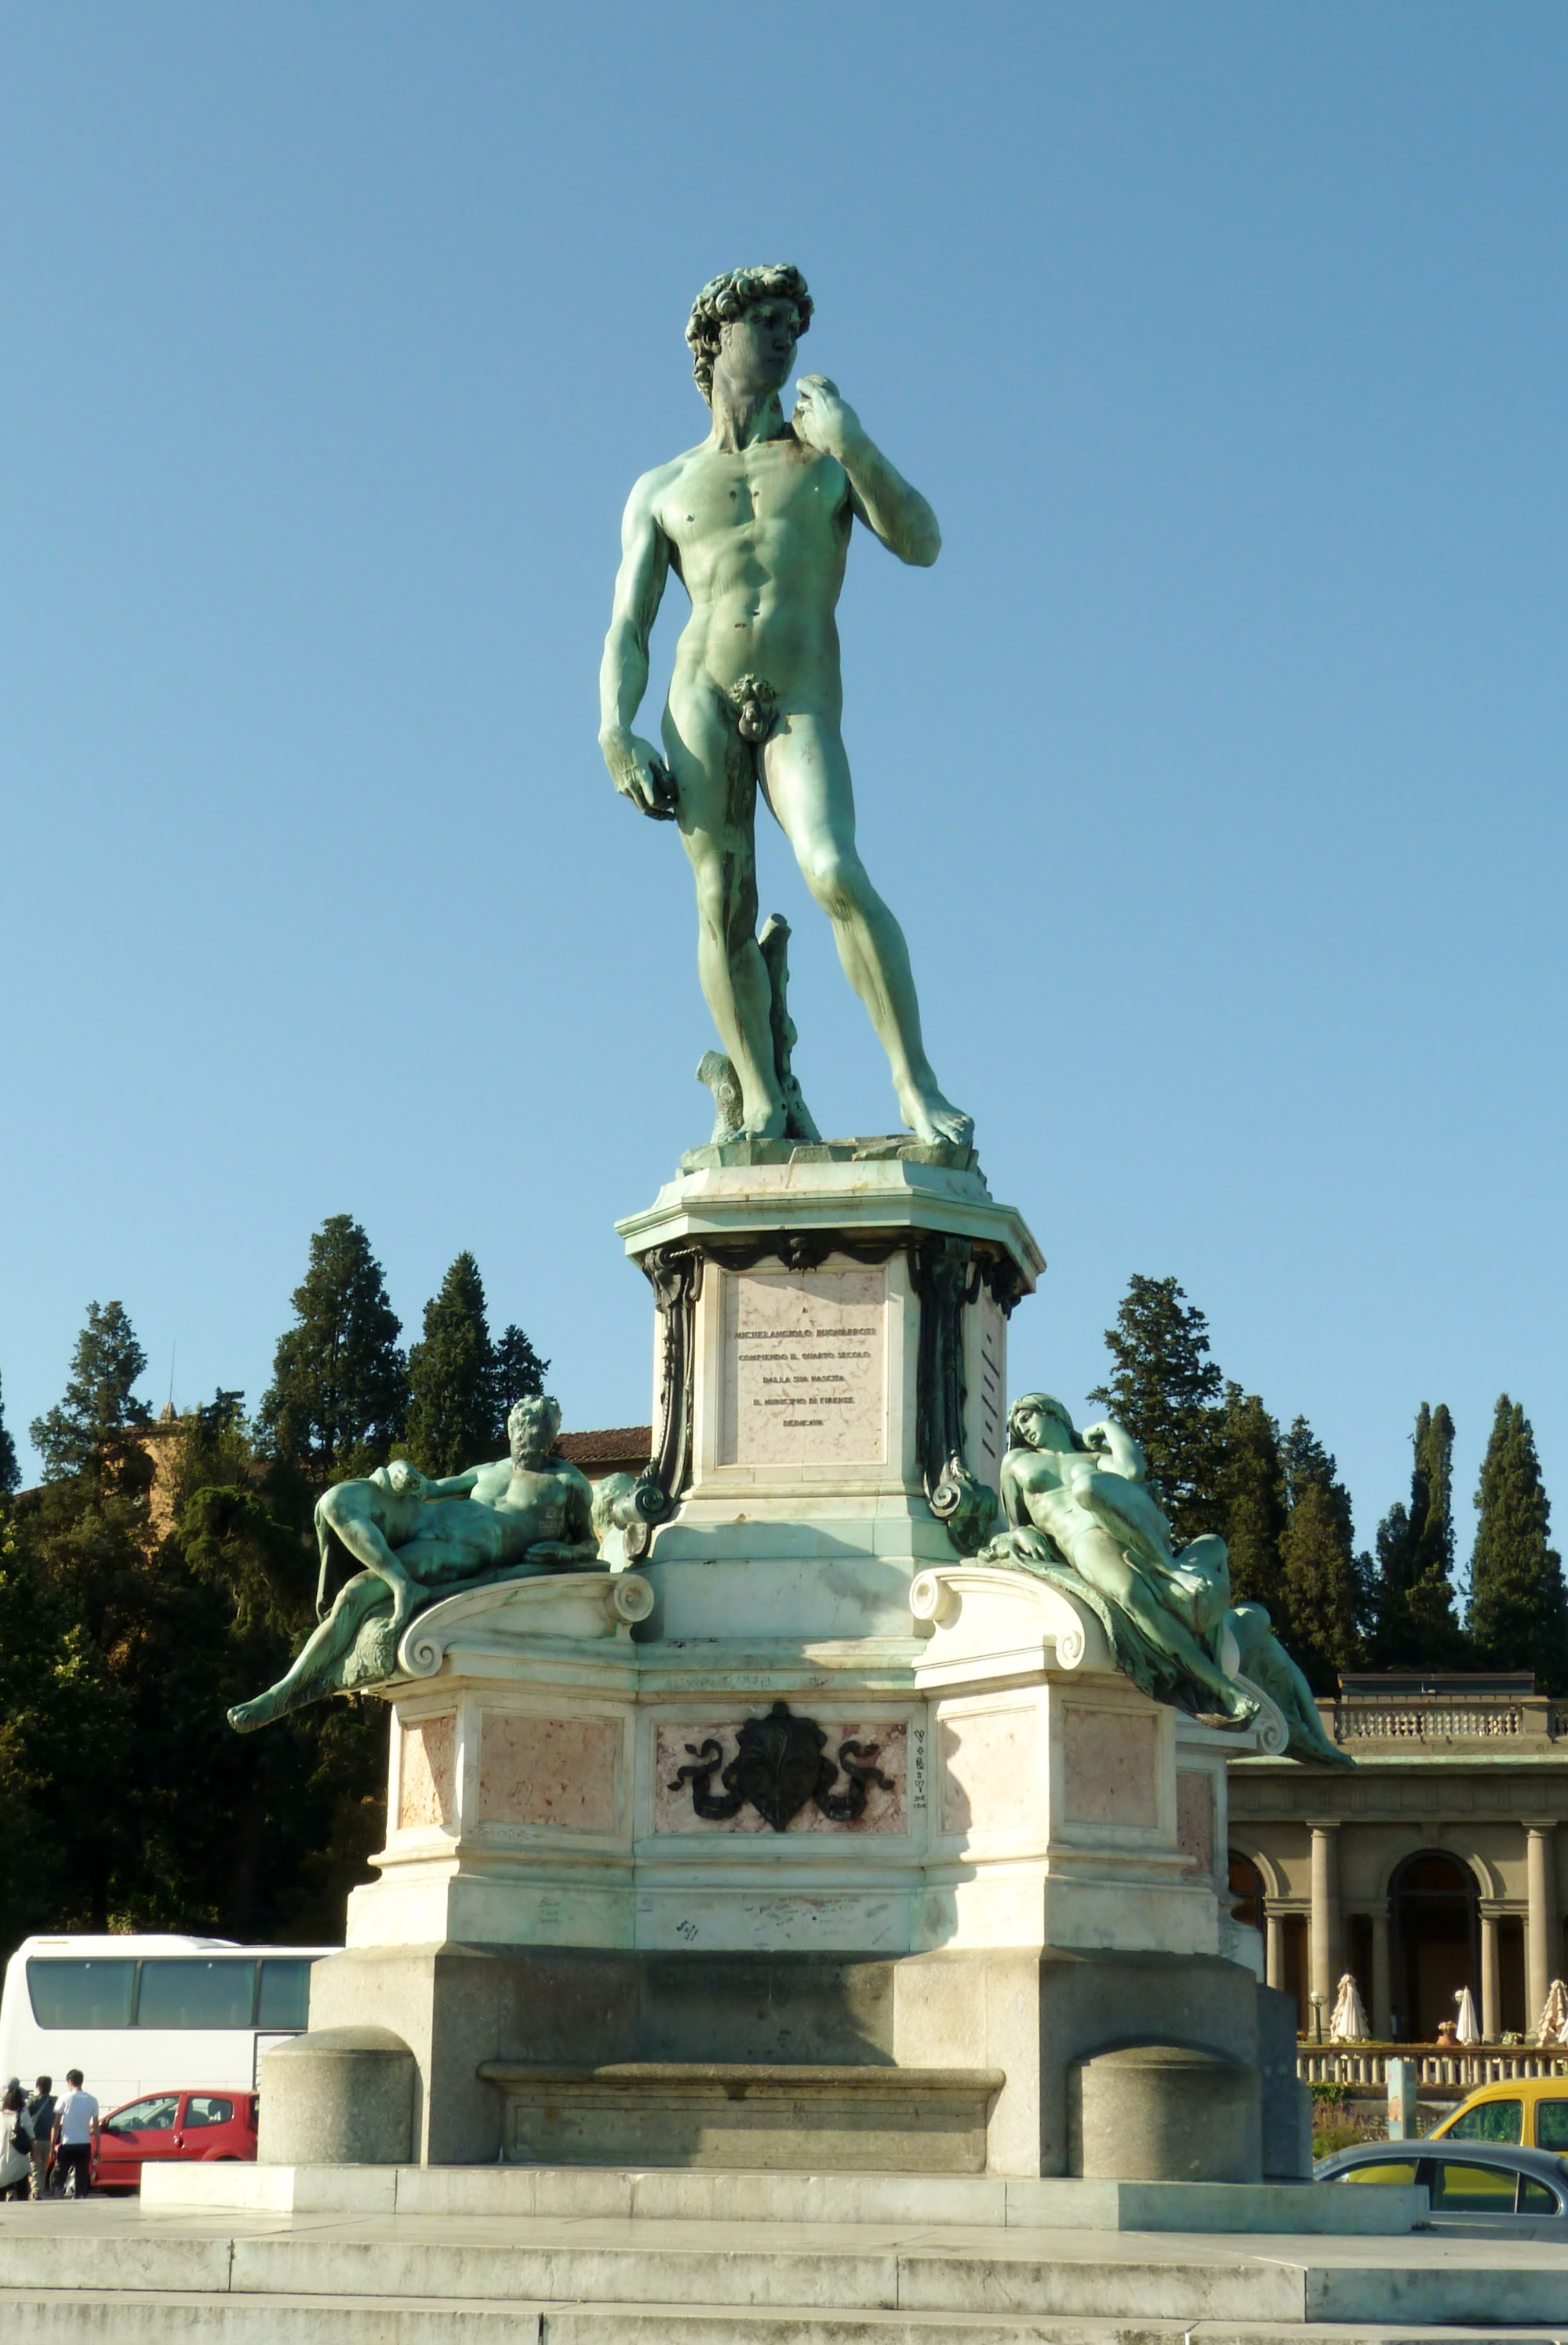 Replica David by michelangelo at city viewpoint